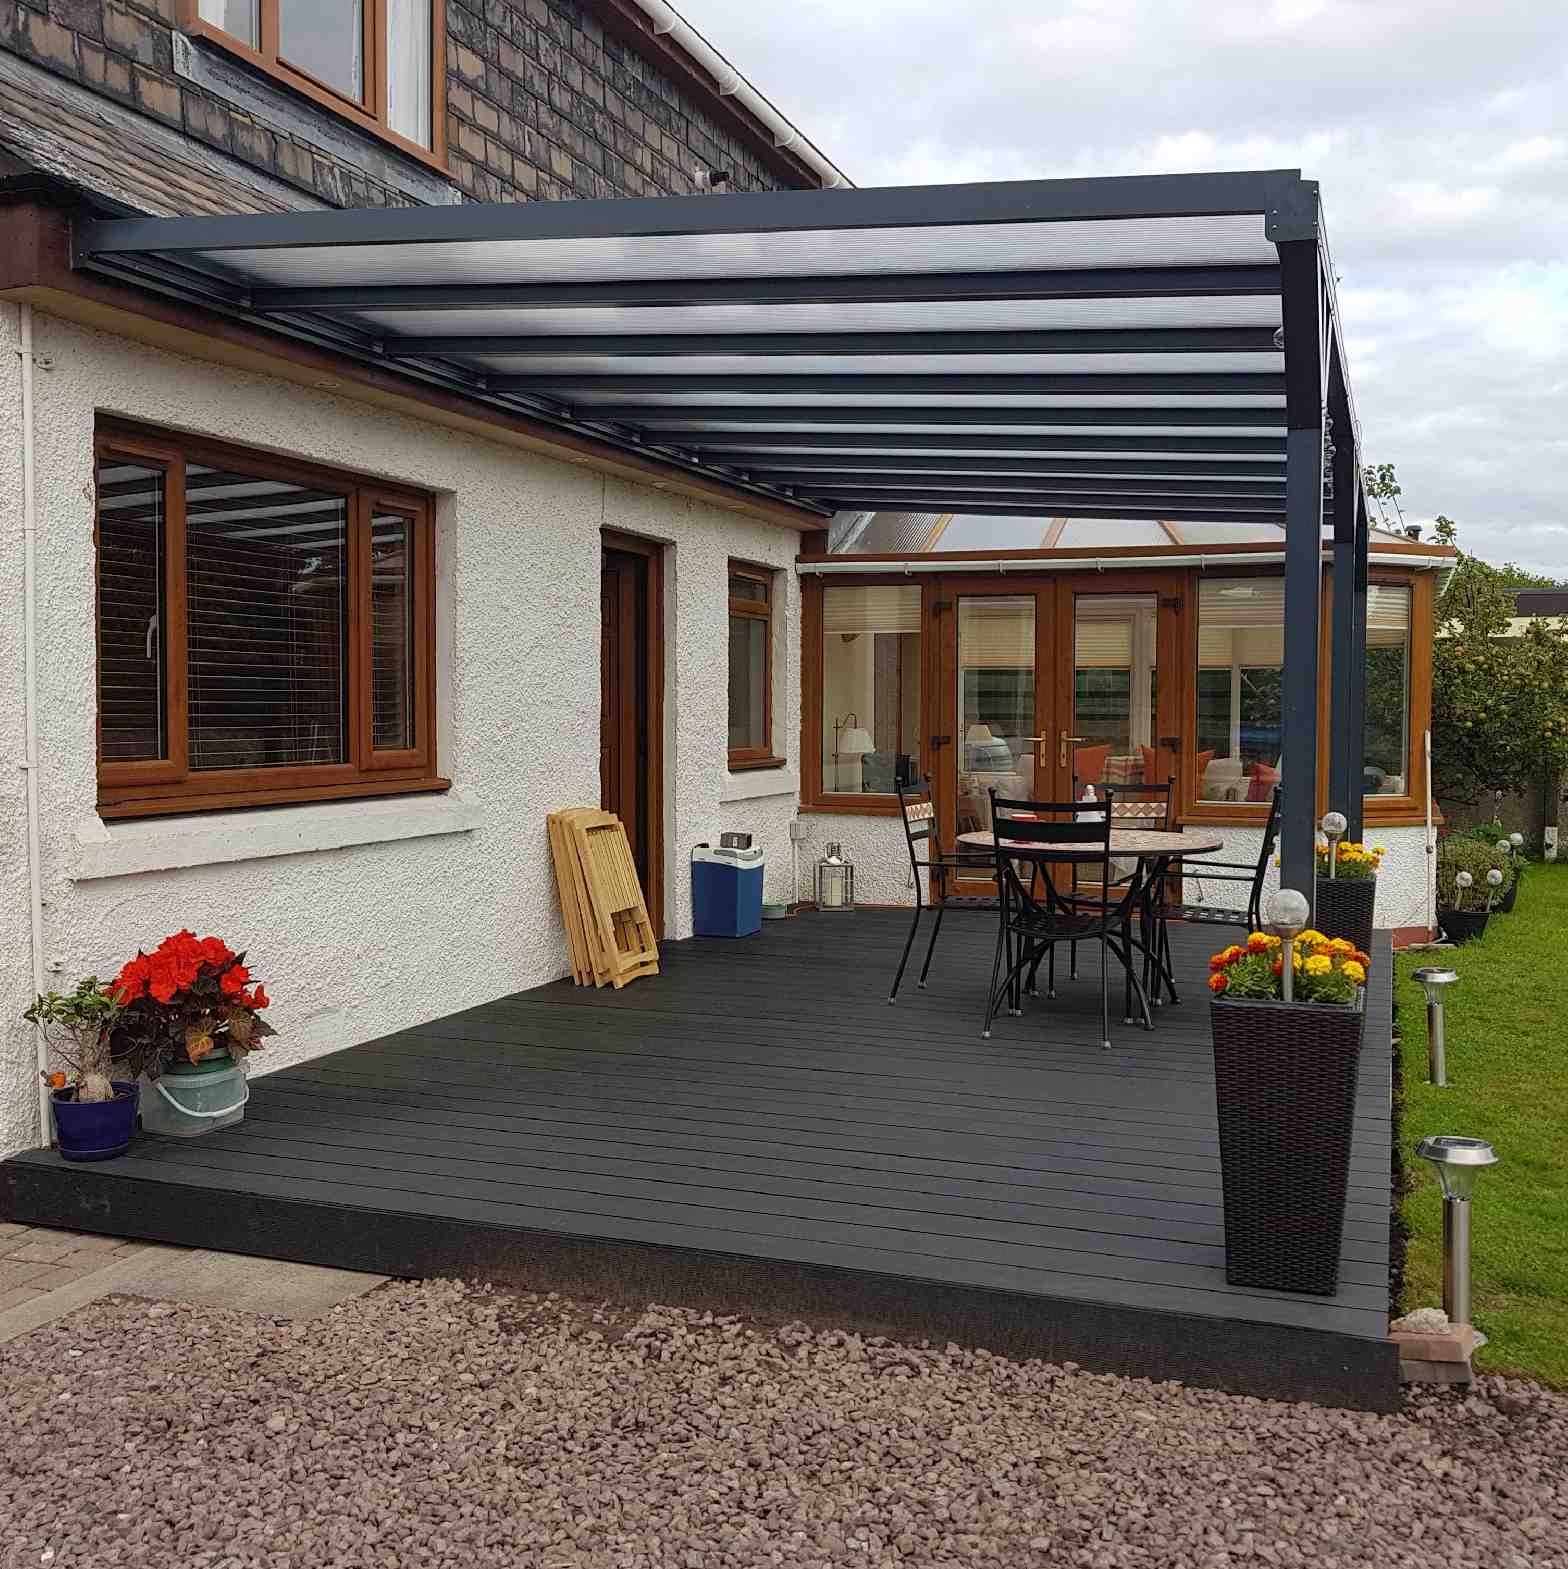 Buy Omega Verandah, Anthracite Grey, 16mm Polycarbonate Glazing - 5.9m (W) x 4.5m (P), (3) Supporting Posts online today